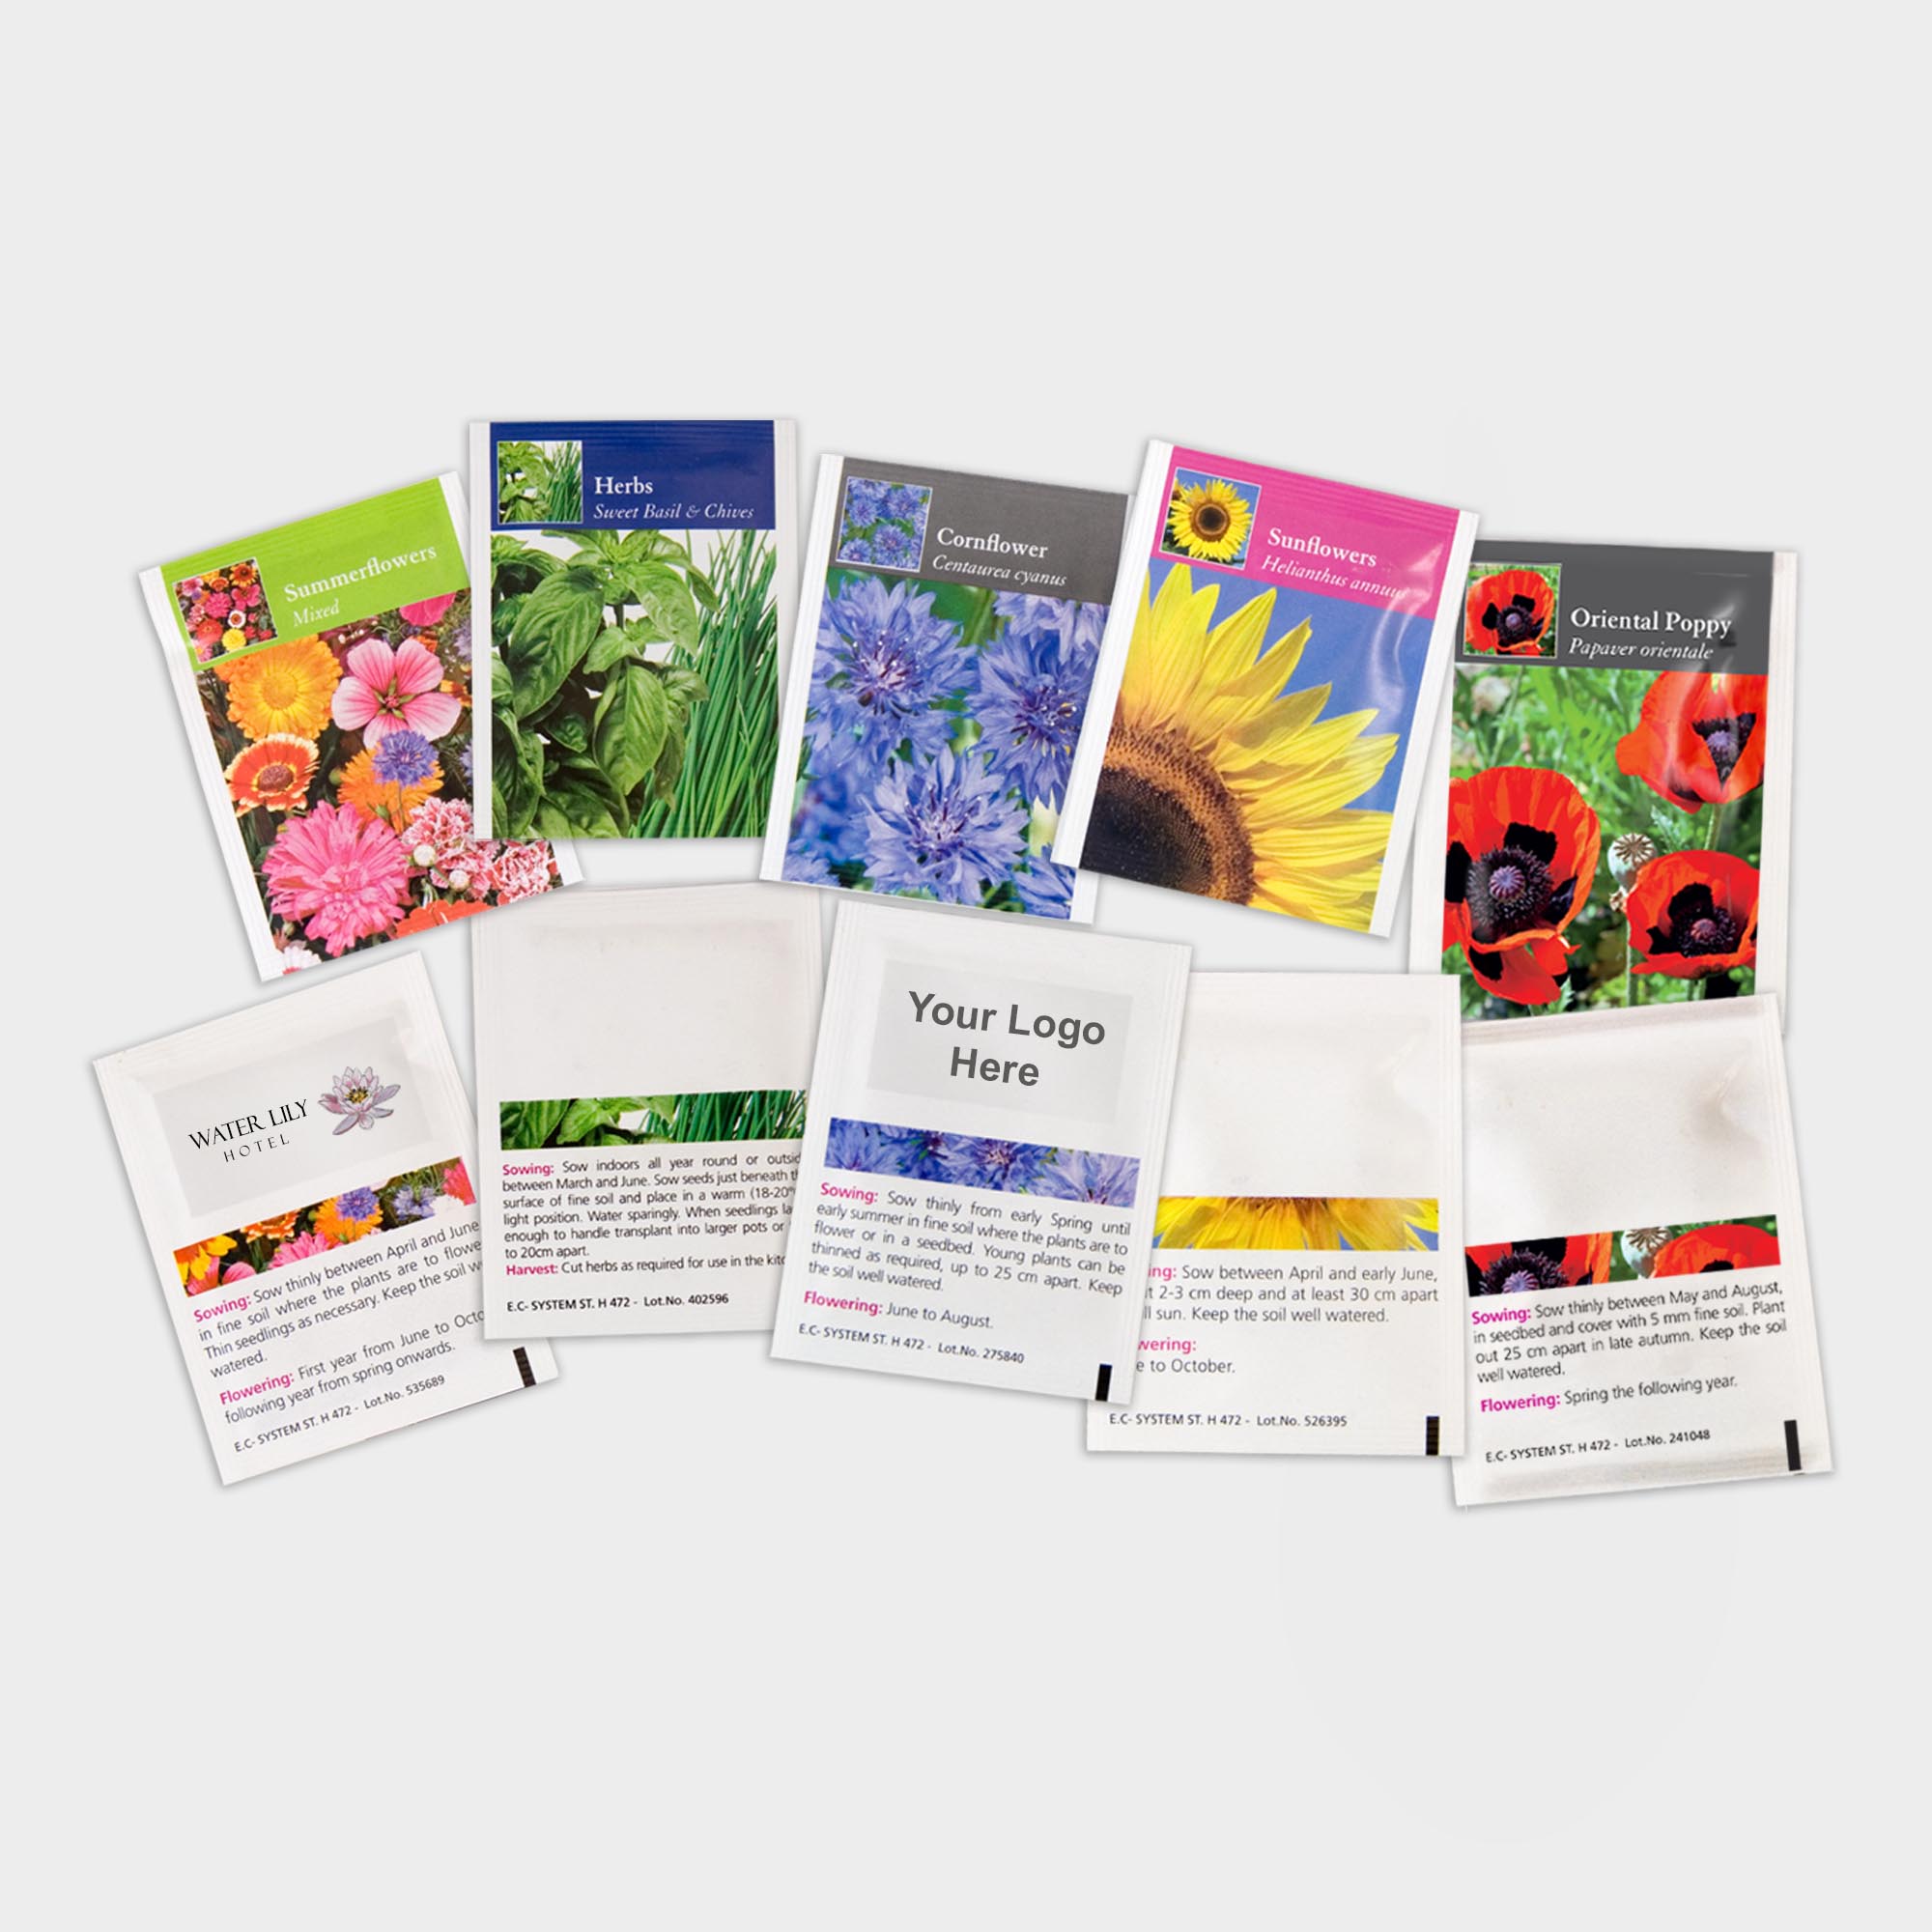 The Green & Good Standard Seed Packet come in pre-printed packets with the relevant seed variety. These packets have a very convenient size of 62 x 80mm, almost like a business card. Select from seven popular varieties: Sunflower, Forget me not, Mixed Summer Flowers, Butterfly & Bee, Poppy, Cornflower and Herbs. Personalise these packets with a clear acetate label, digitally printed 4-col process.